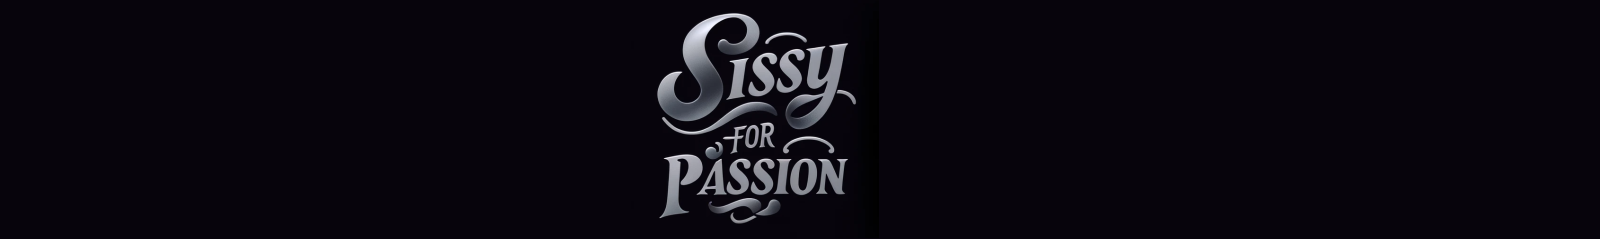 Sissy for passion